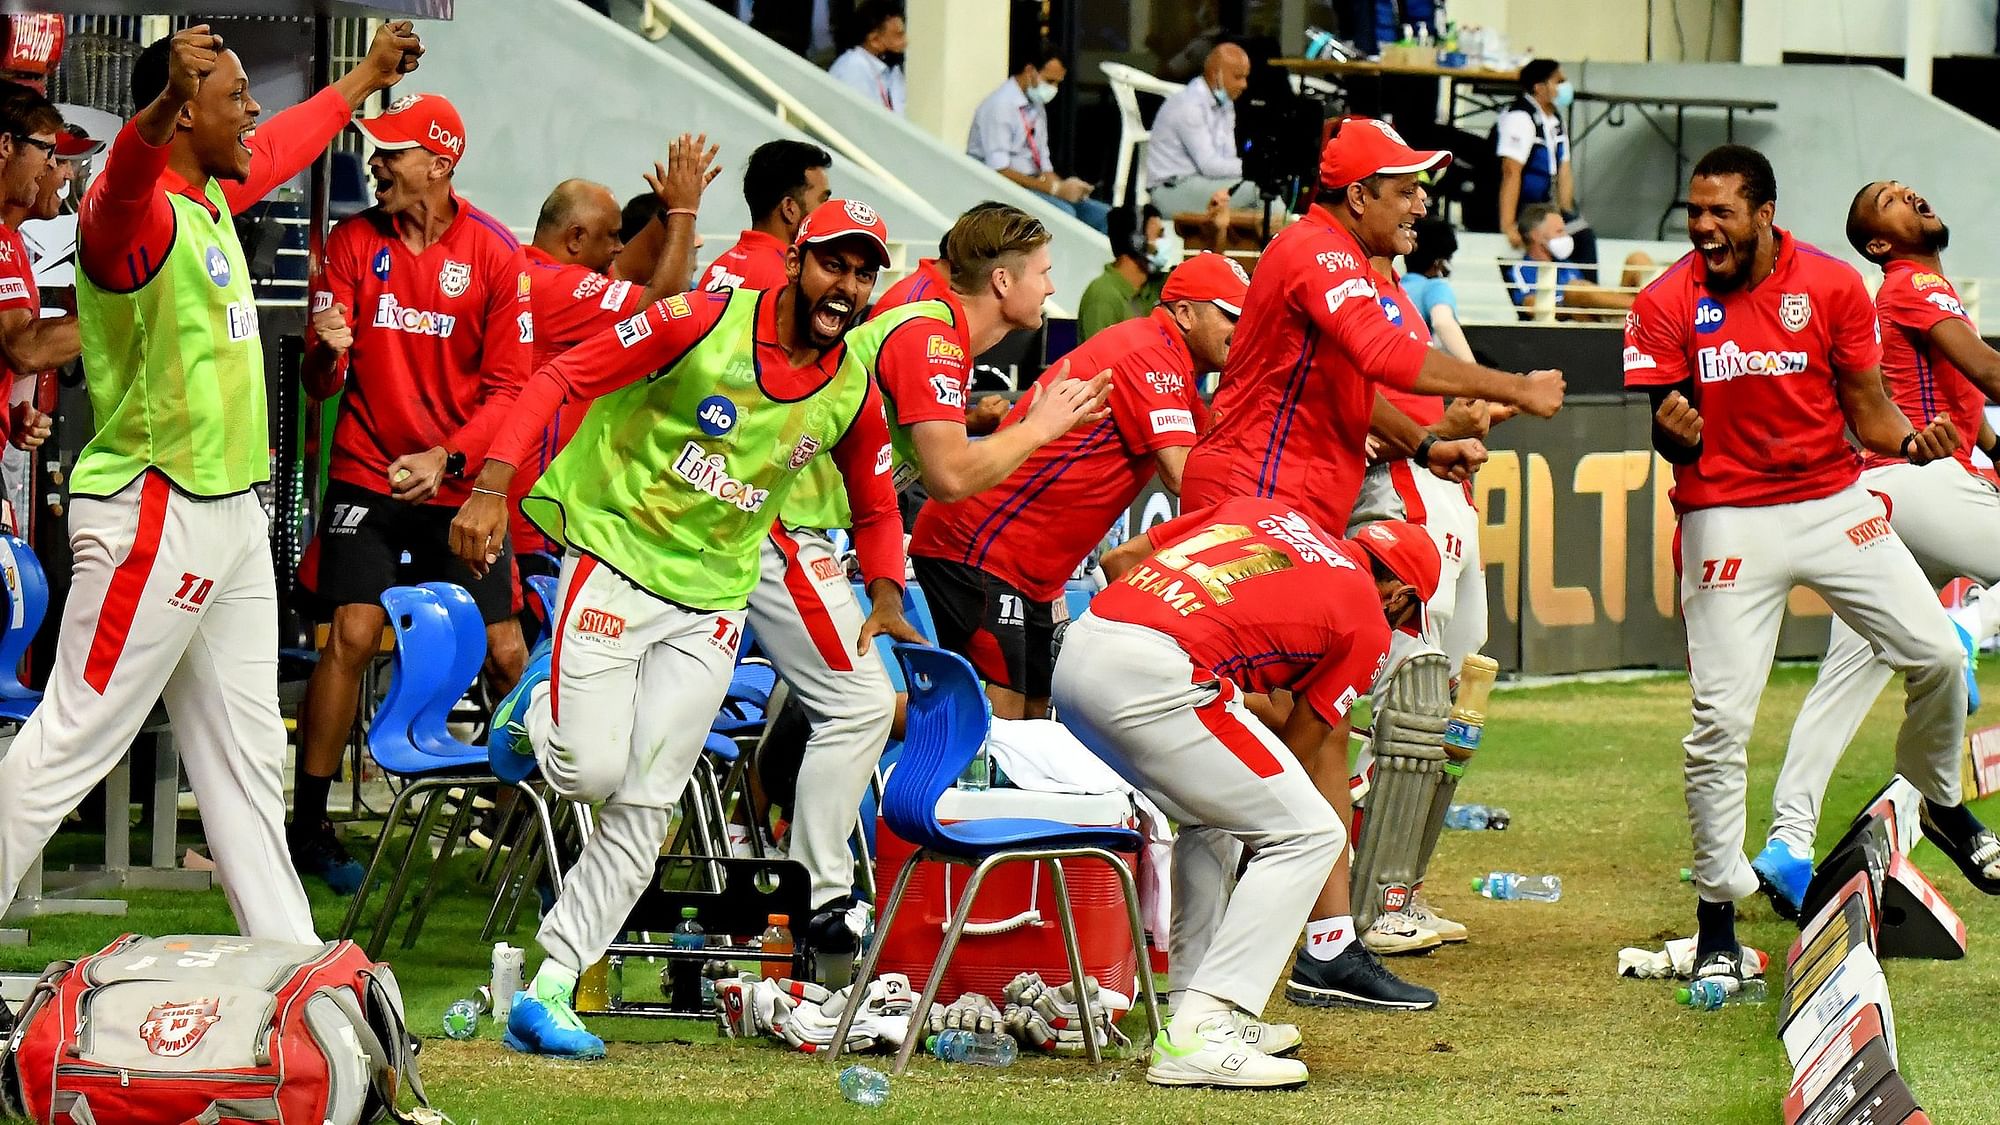 With the battle for fourth place heating up, Kings XI Punjab have staked their claim with three wins in a row